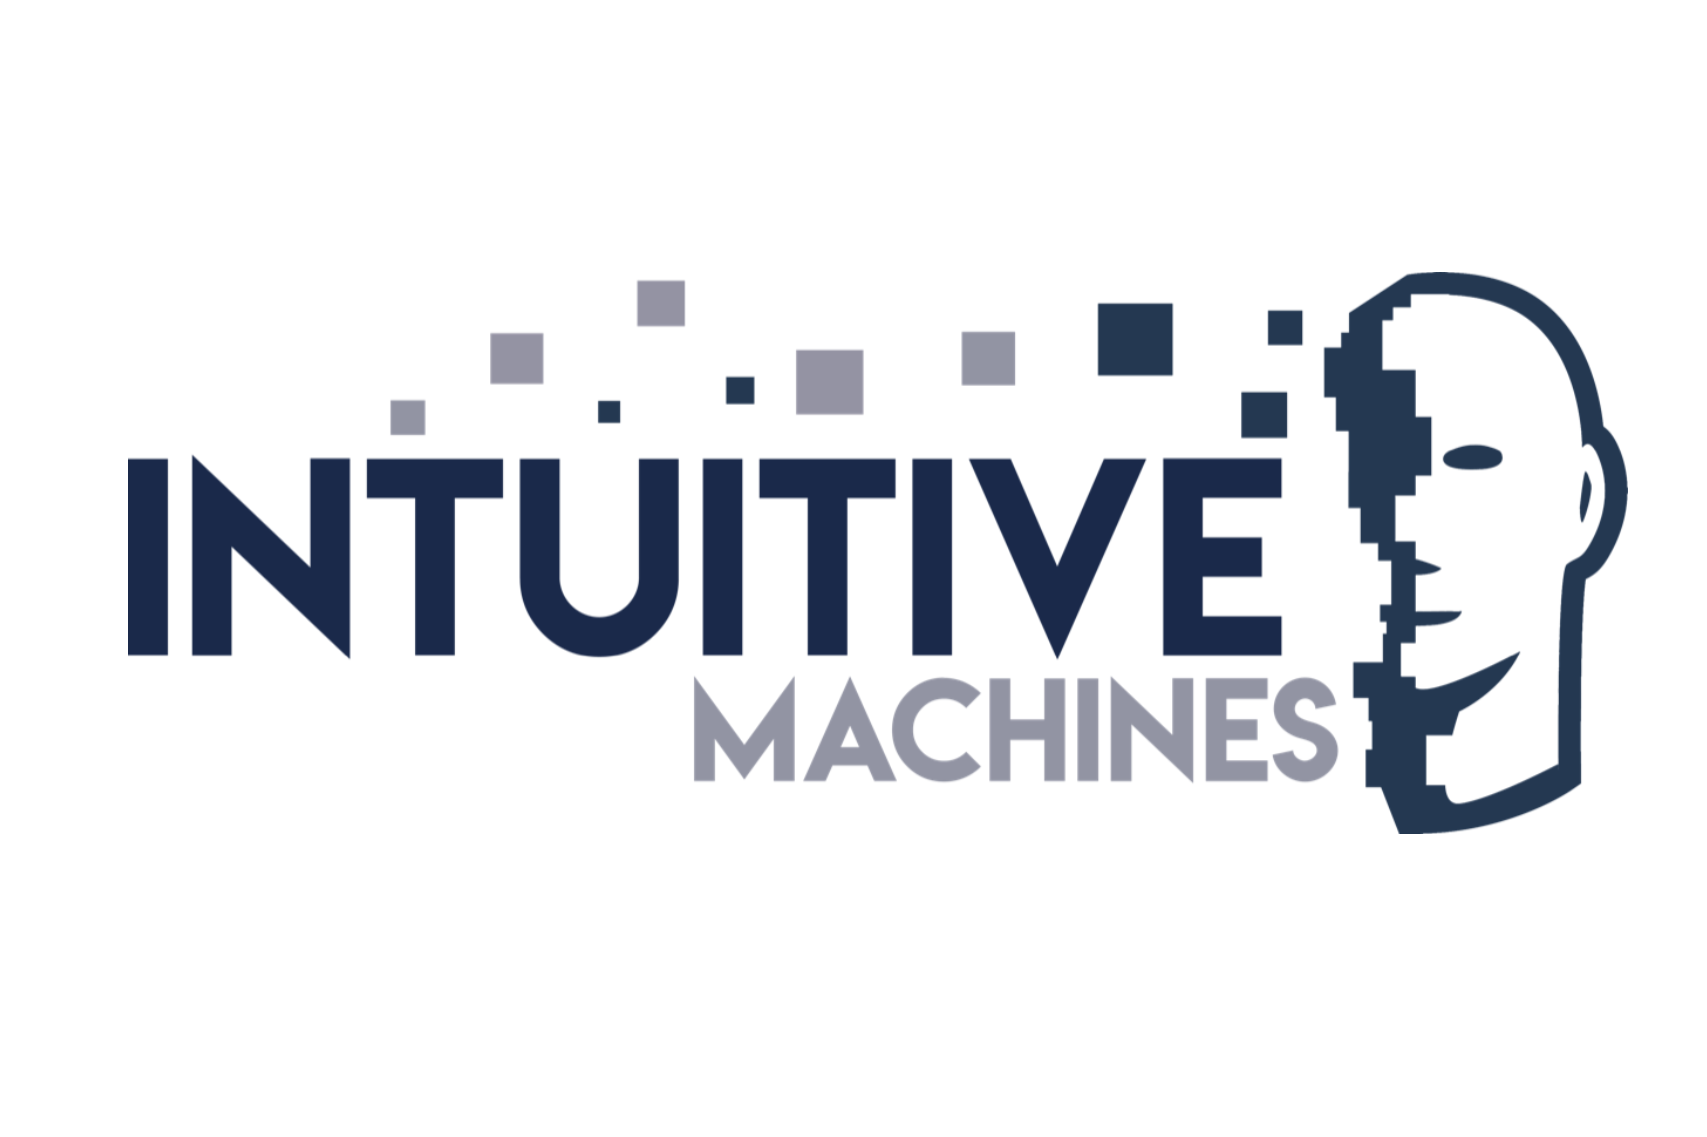 Intuitive Machines shares